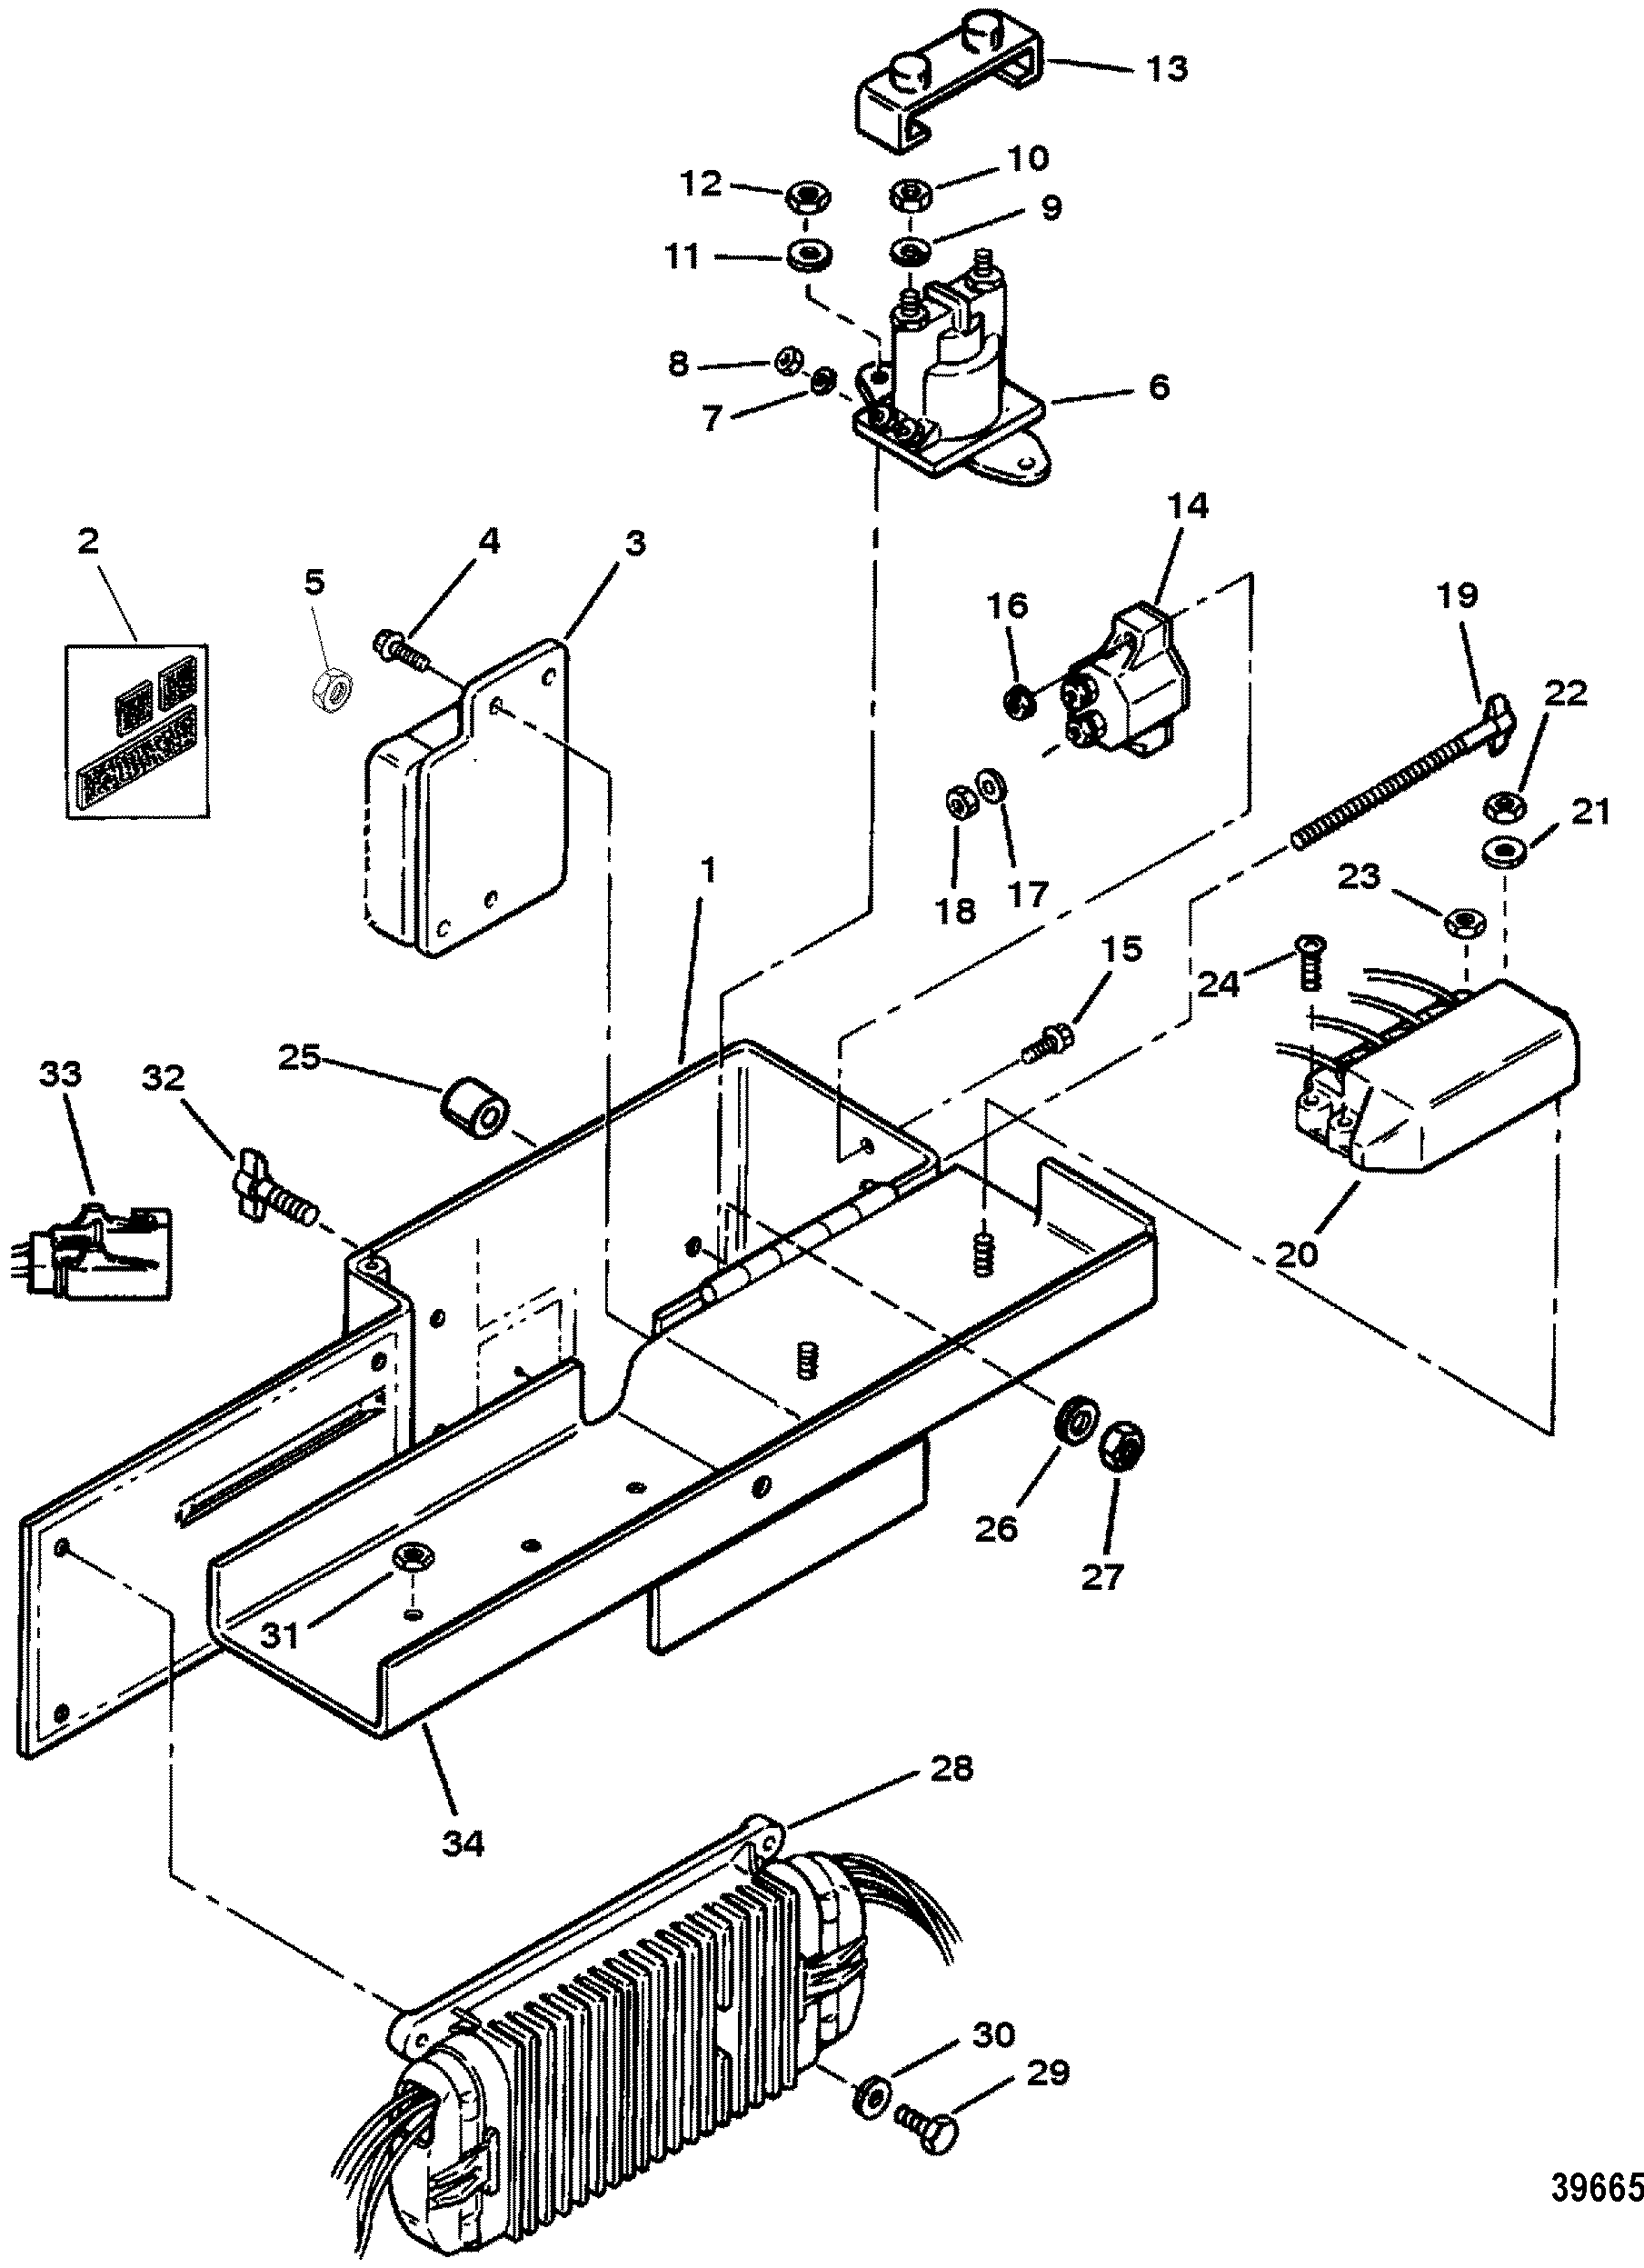 ELECTRICAL BOX AND COMPONENTS